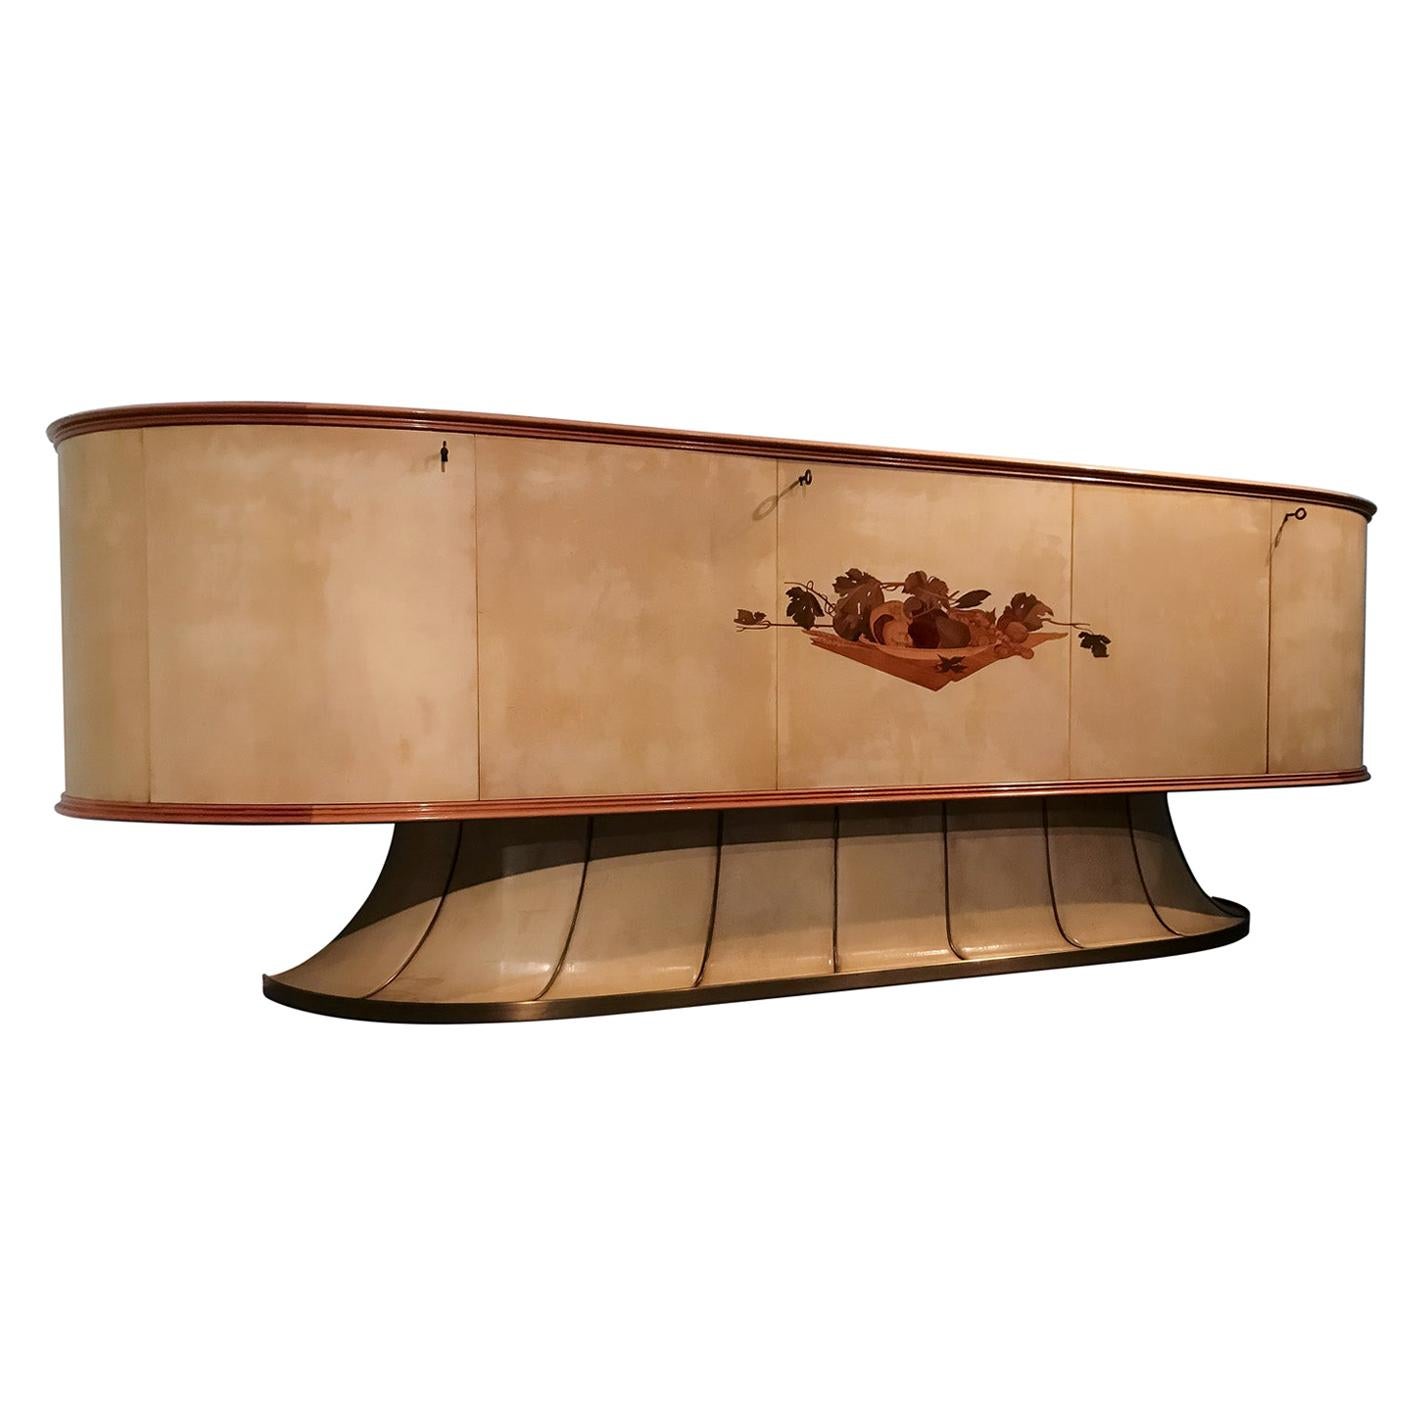 Italian Midcentury Parchment Sideboard with Inlay by Vittorio Dassi, 1950